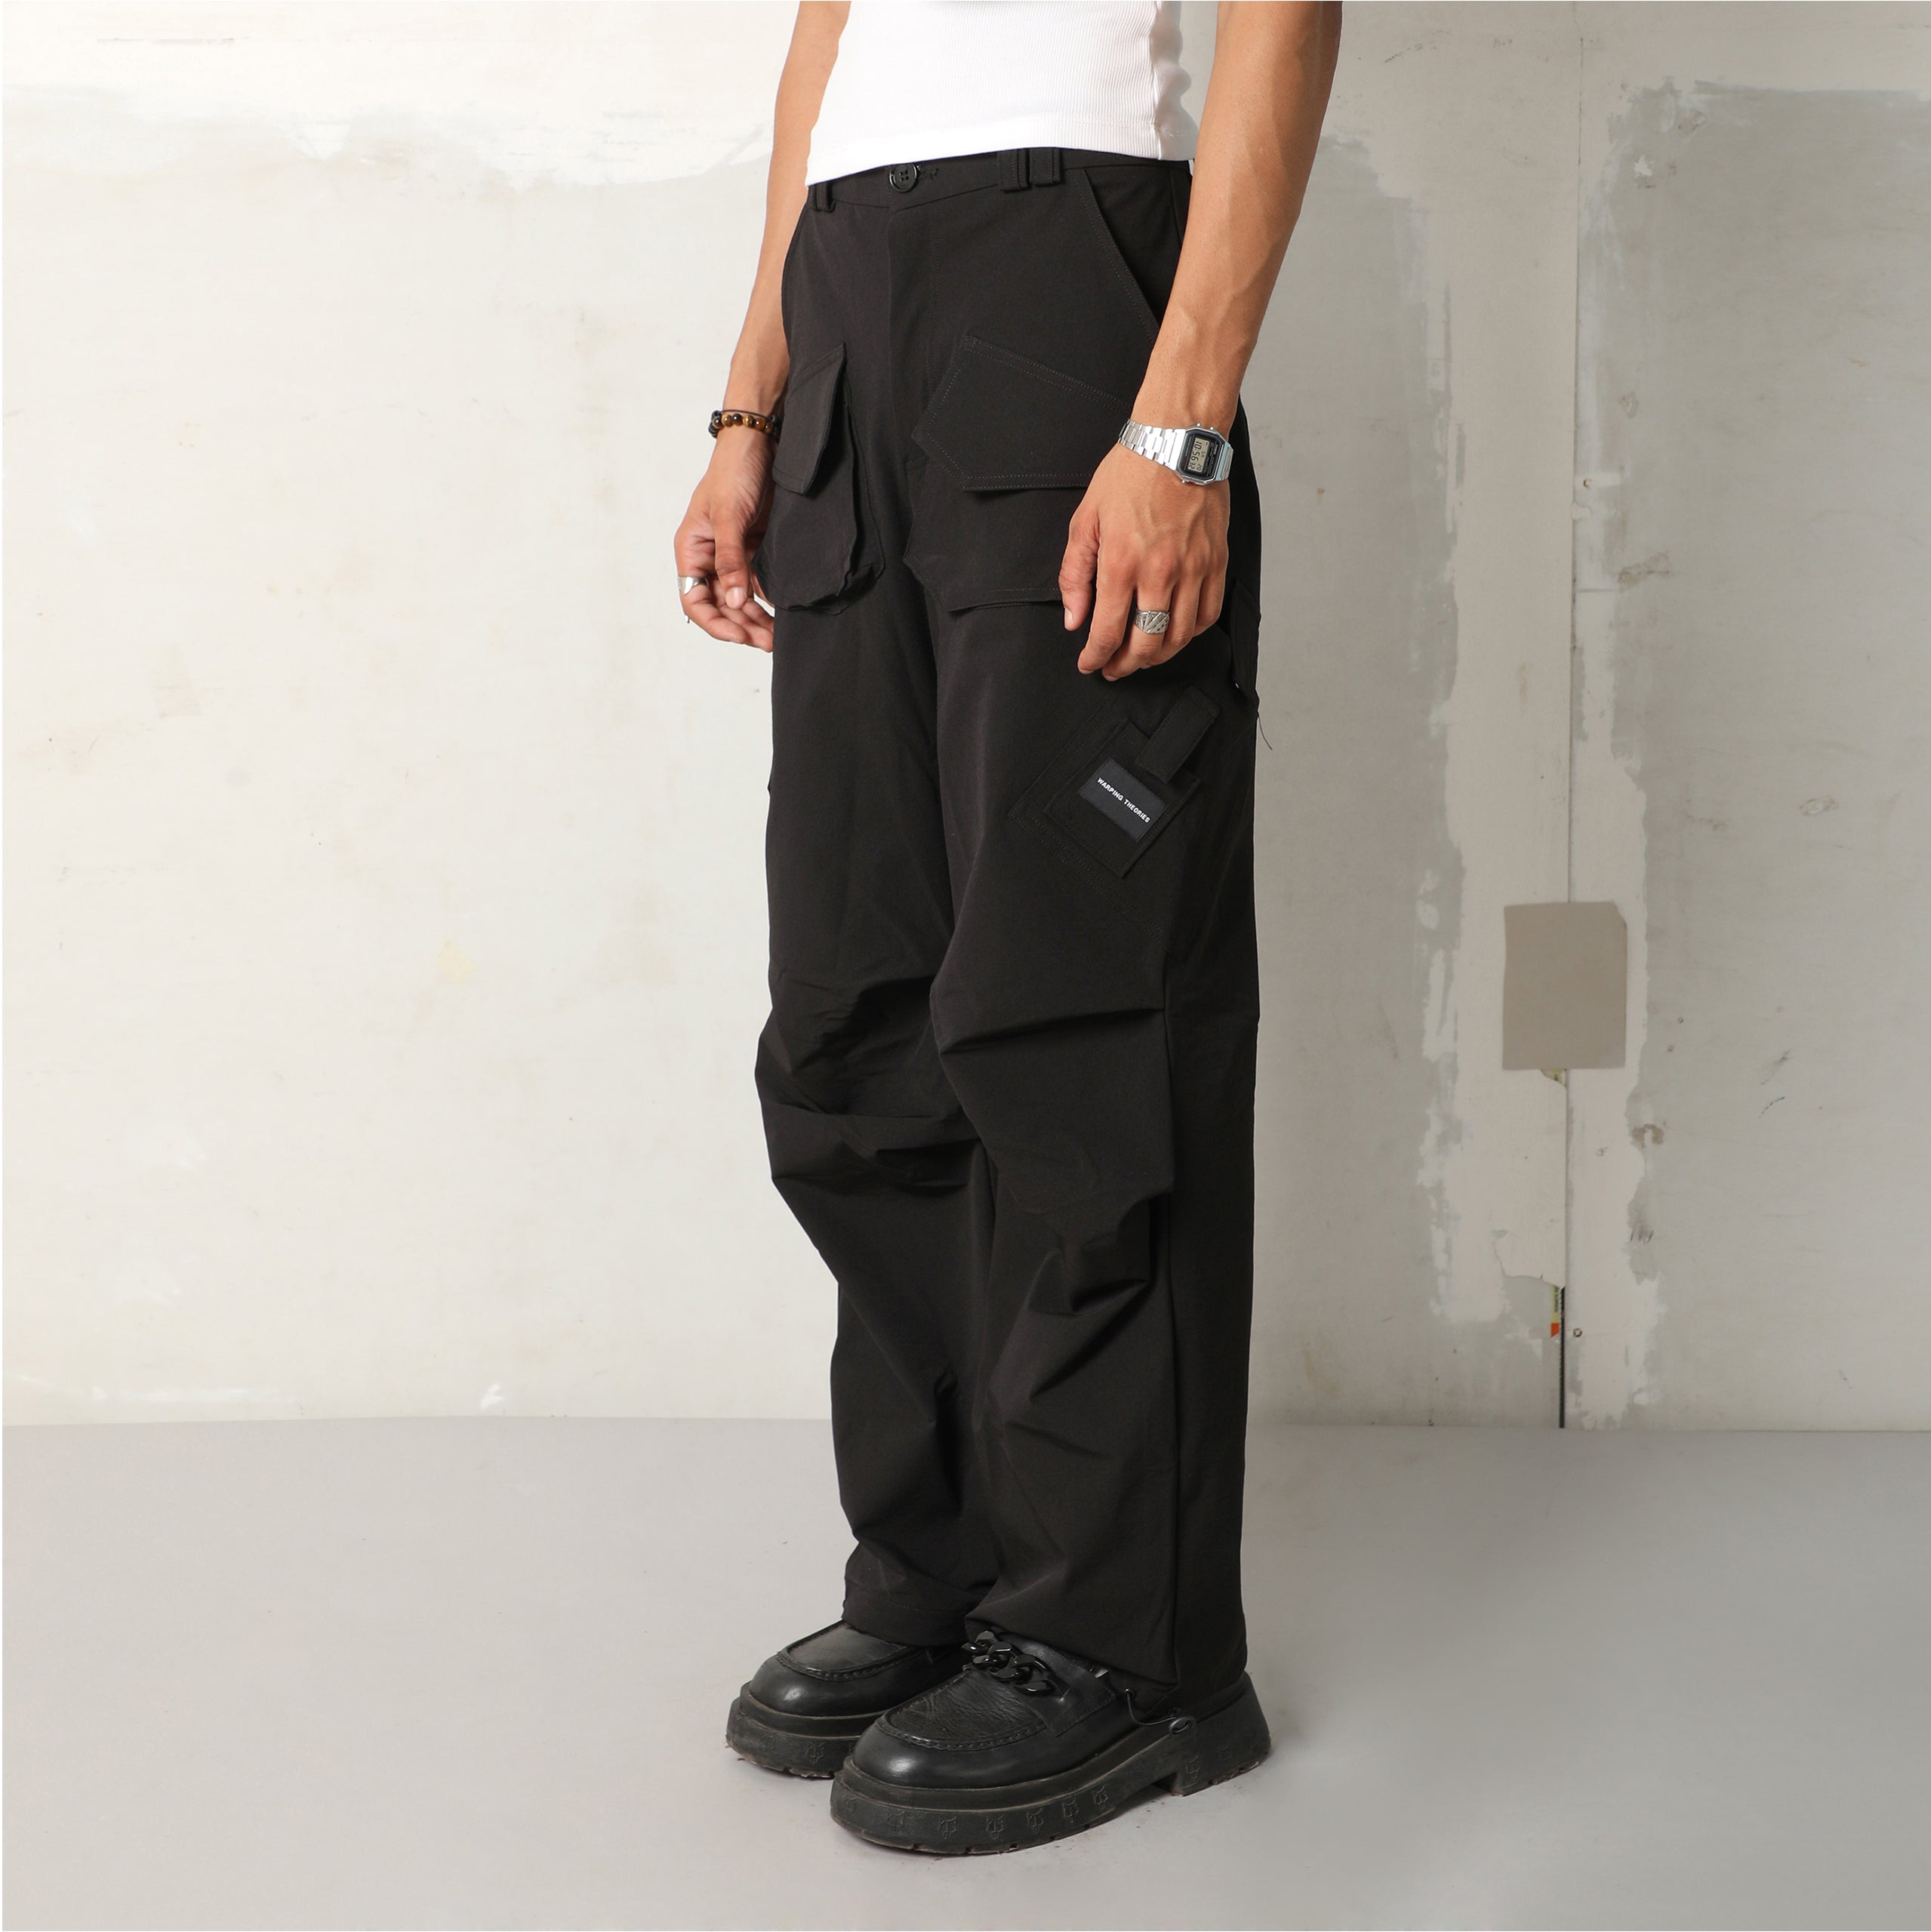 Trousers for Men Types of PantsChinosJoggersTrack pants at affordable  prices  In Hindi  YouTube